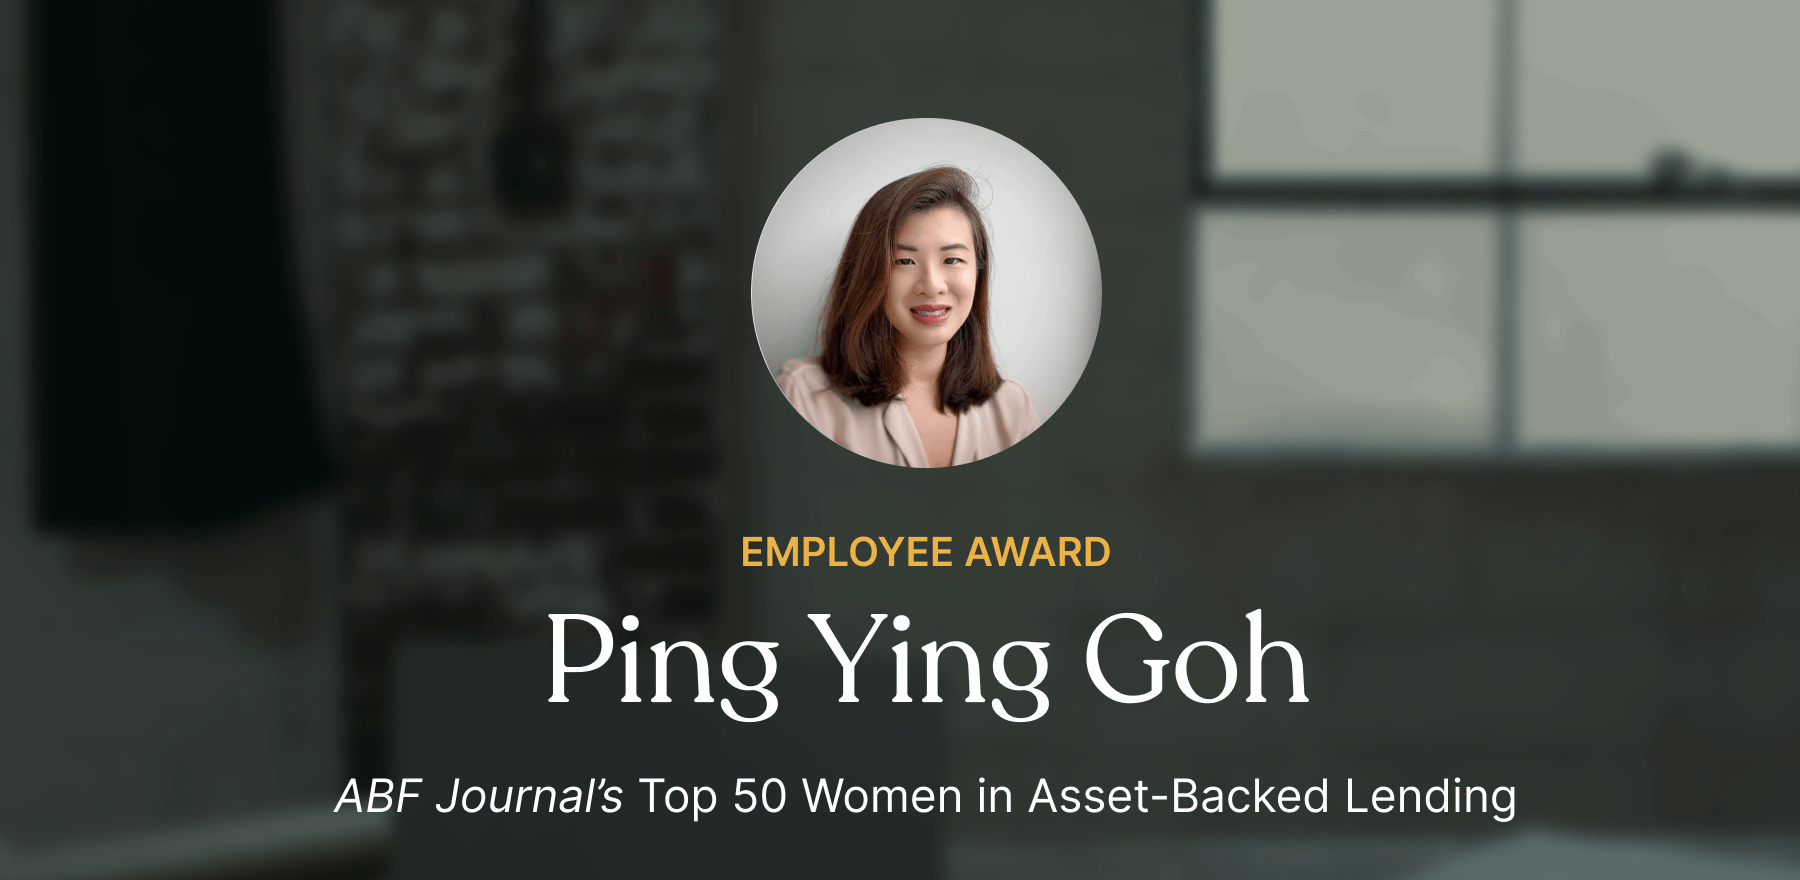 Congratulations to Ping Ying Goh on Top Women in ABL Award - Featured image